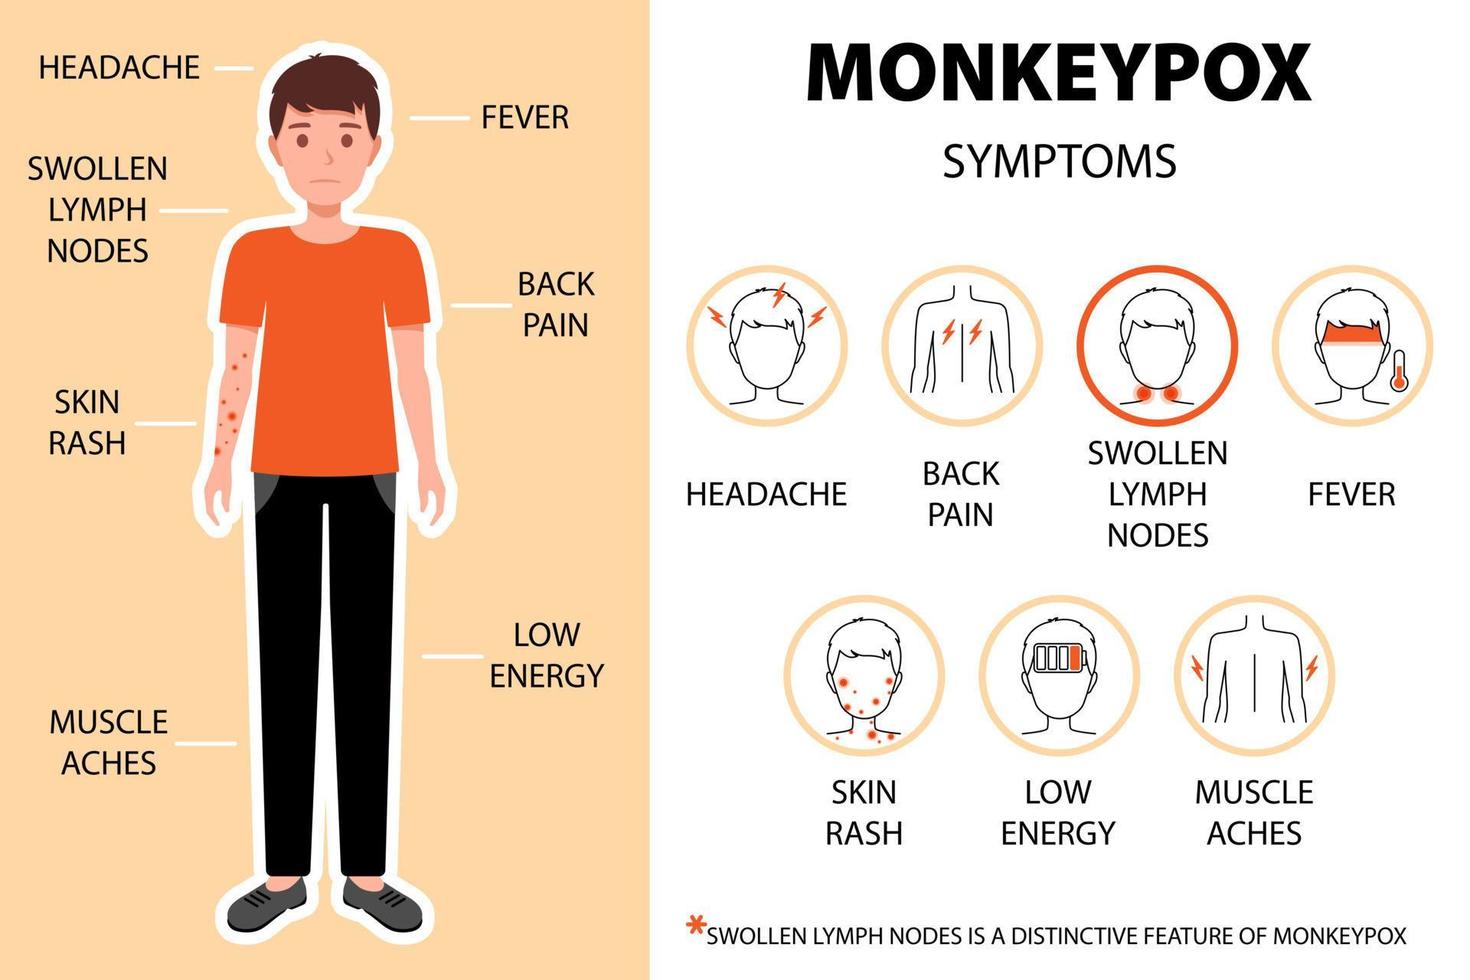 Monkeypox virus symptoms infographic with man. Headache, back pain, swollen lymph nodes, fever, skin rash etc. Headache, back pain etc. New outbreak cases in Europe and USA. vector